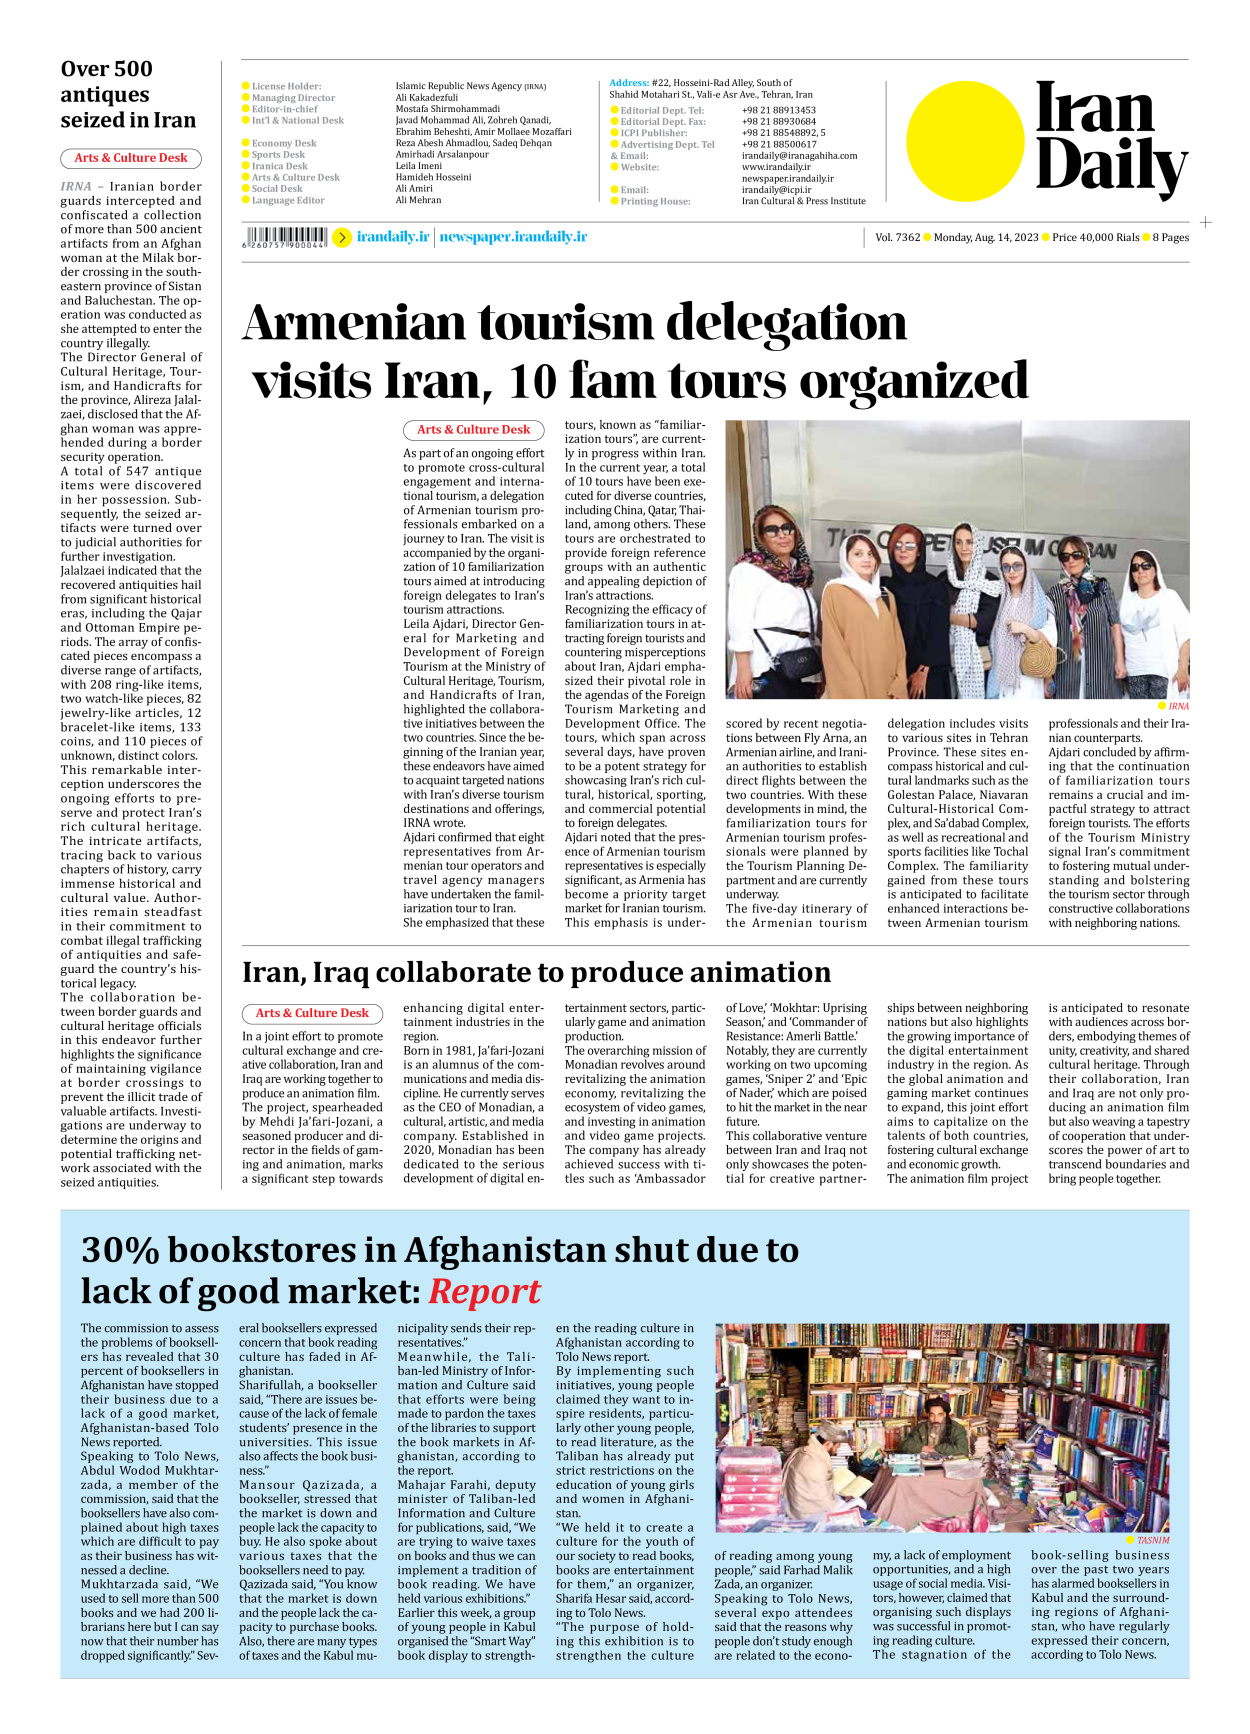 Iran Daily - Number Seven Thousand Three Hundred and Sixty Two - 14 August 2023 - Page 8